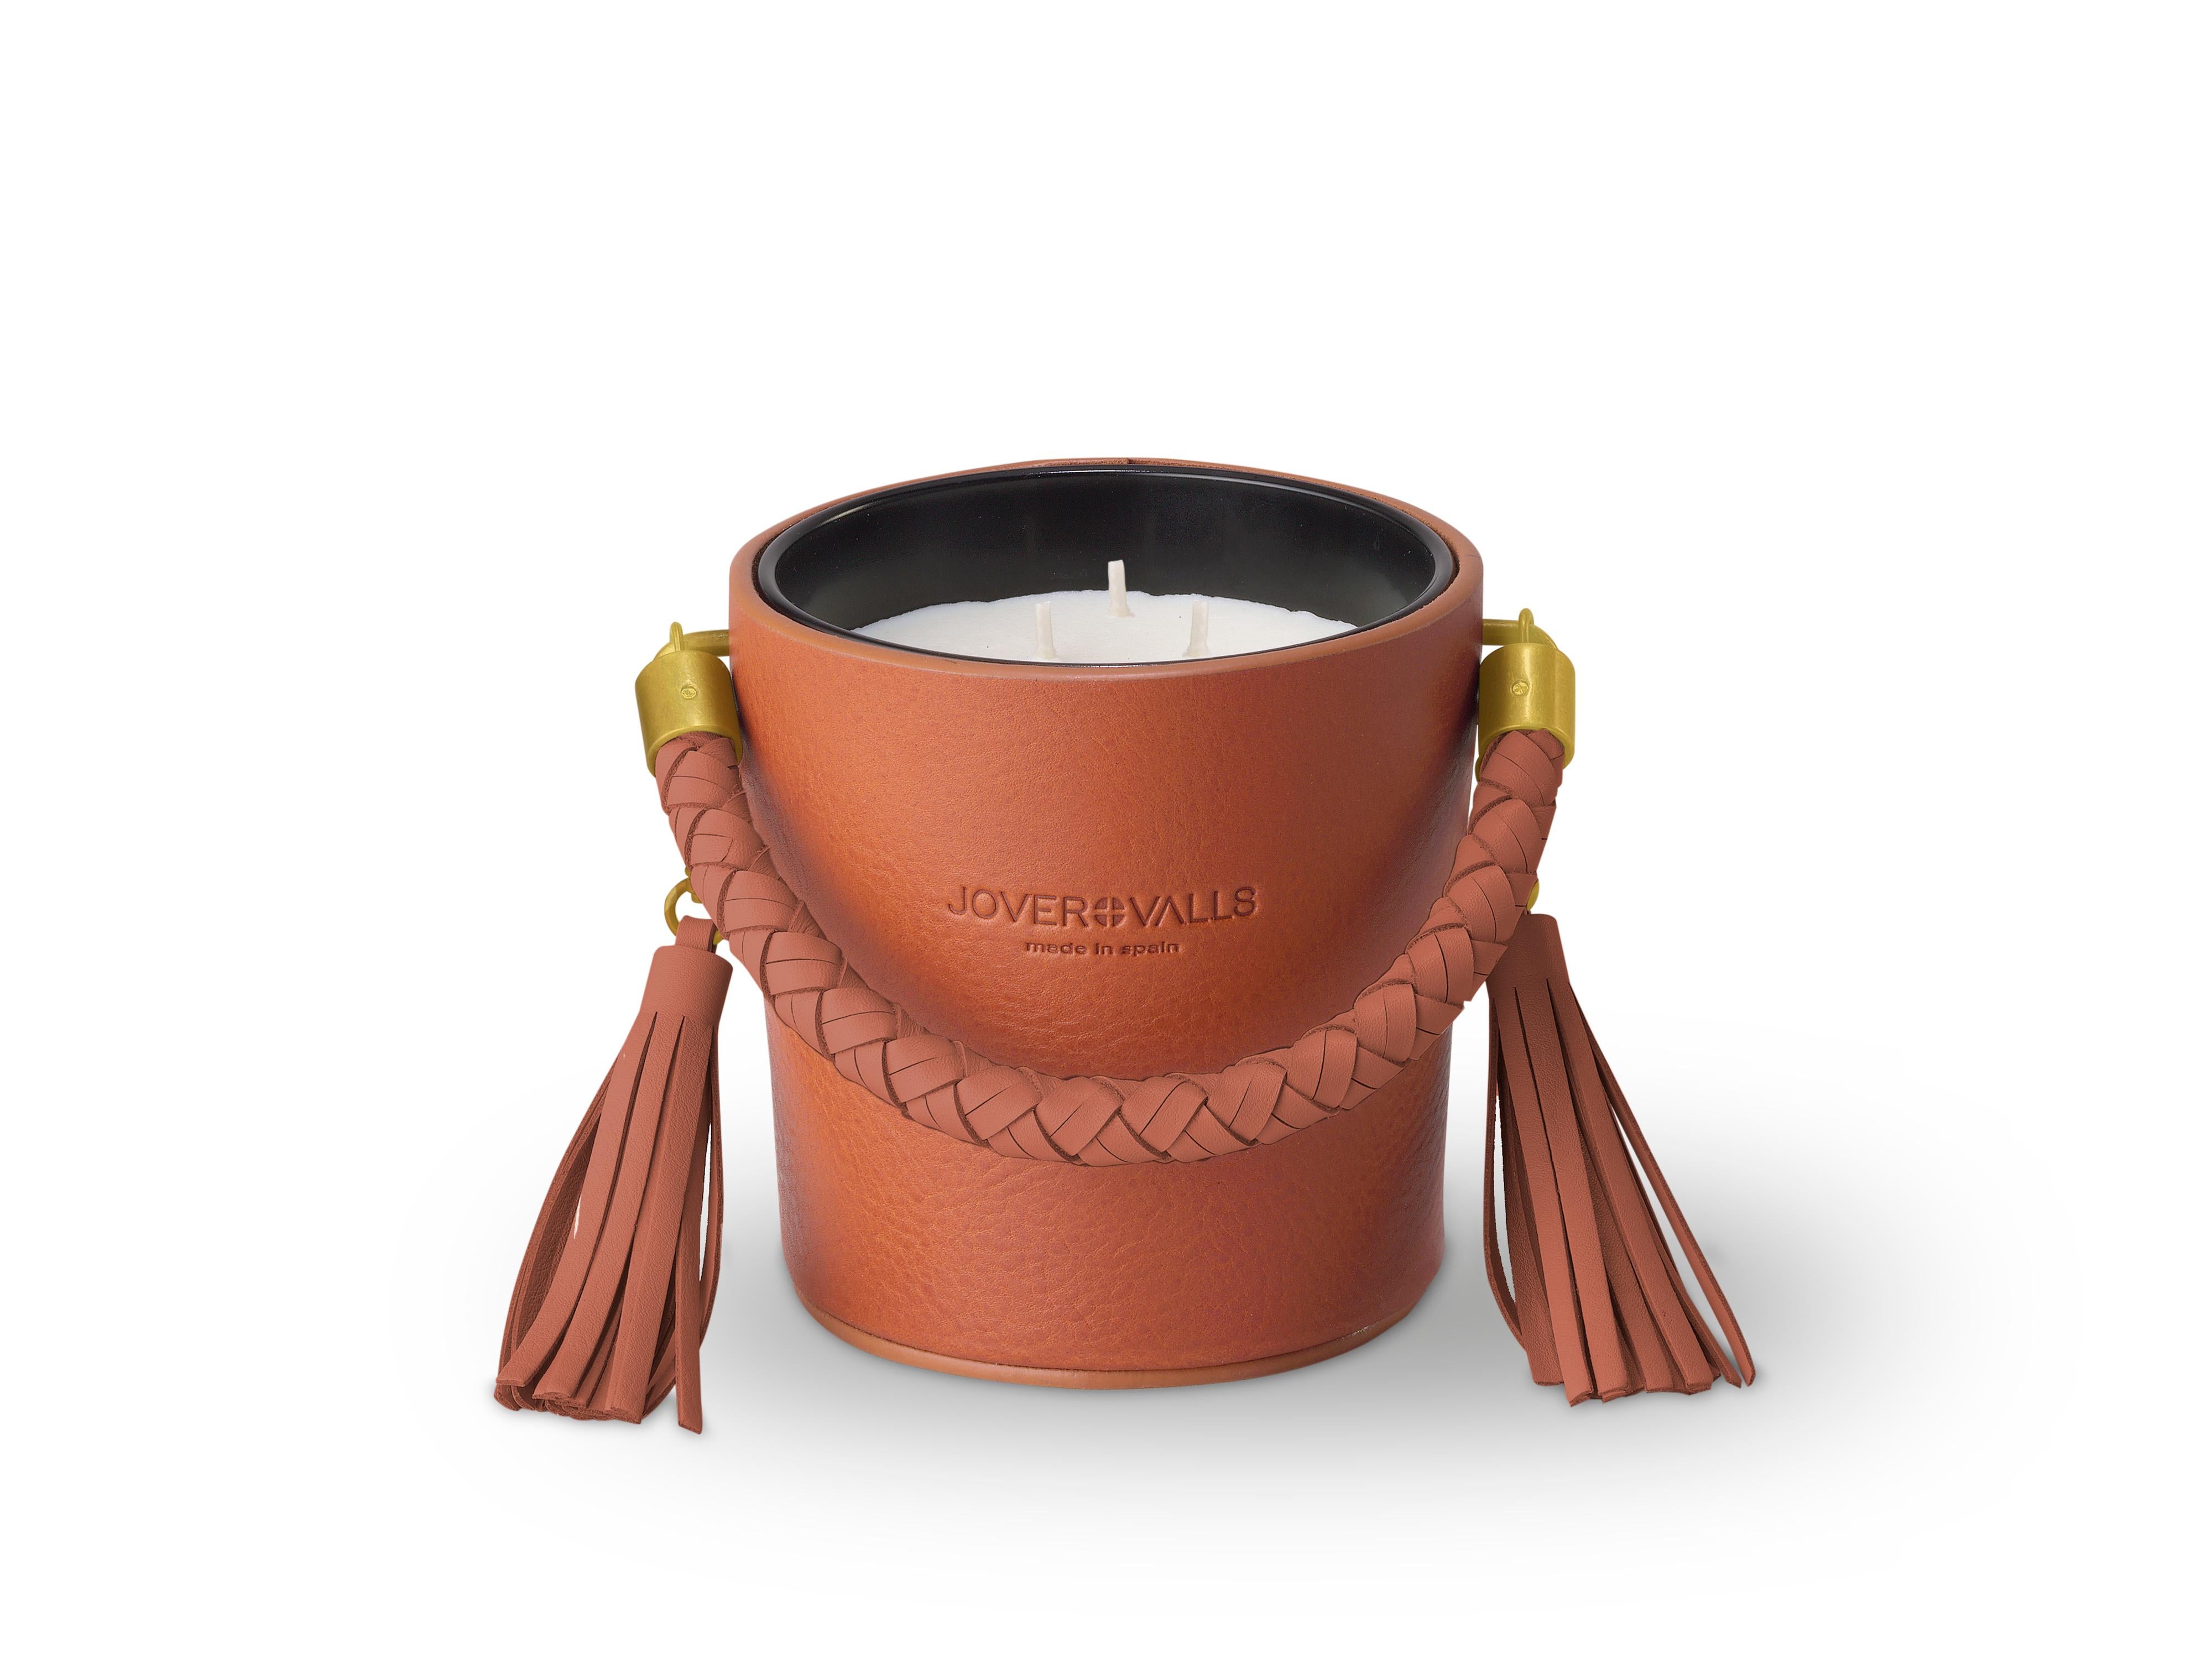 Spanish Bucket, Cognac Leather Candleholder, Sweet Cinnamon Scented Candle 21 Oz For Sale